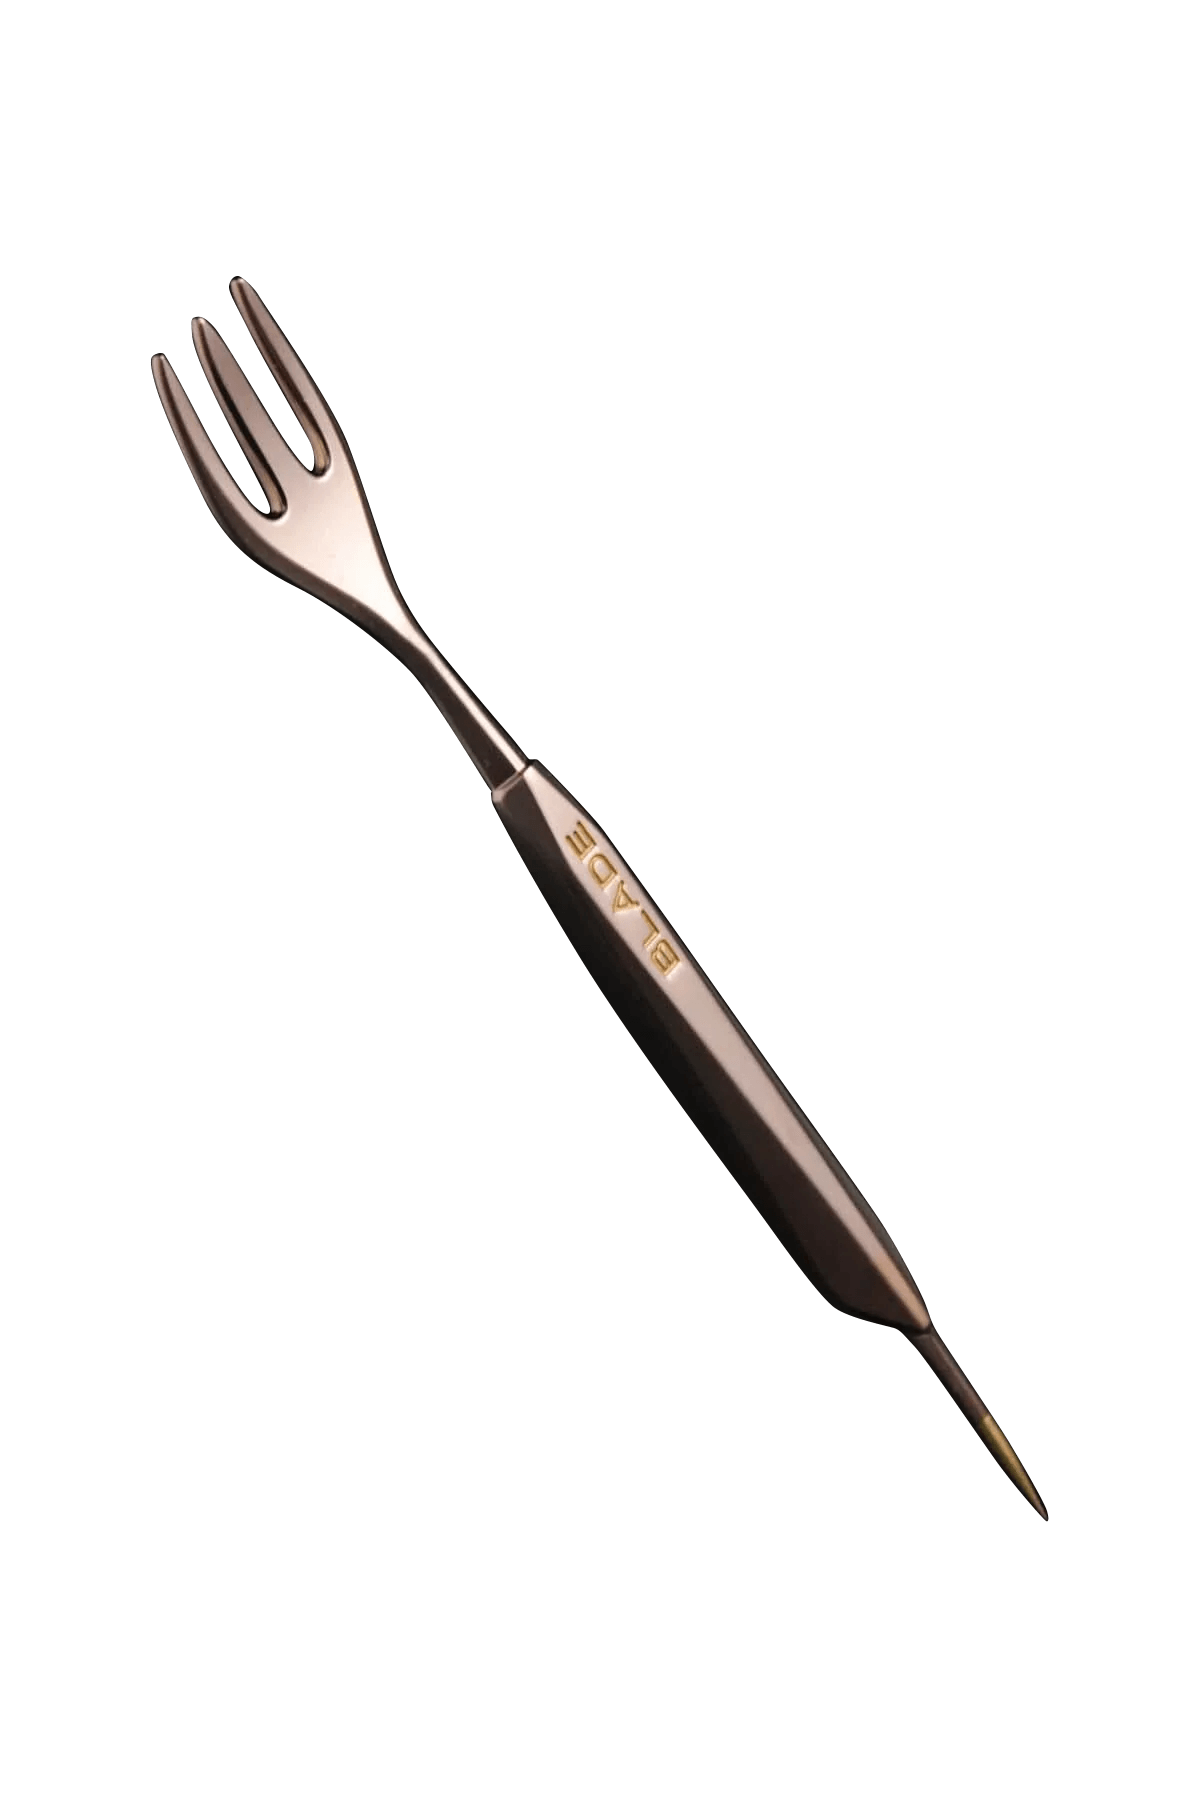 Fork and Seat - Blade Bronze